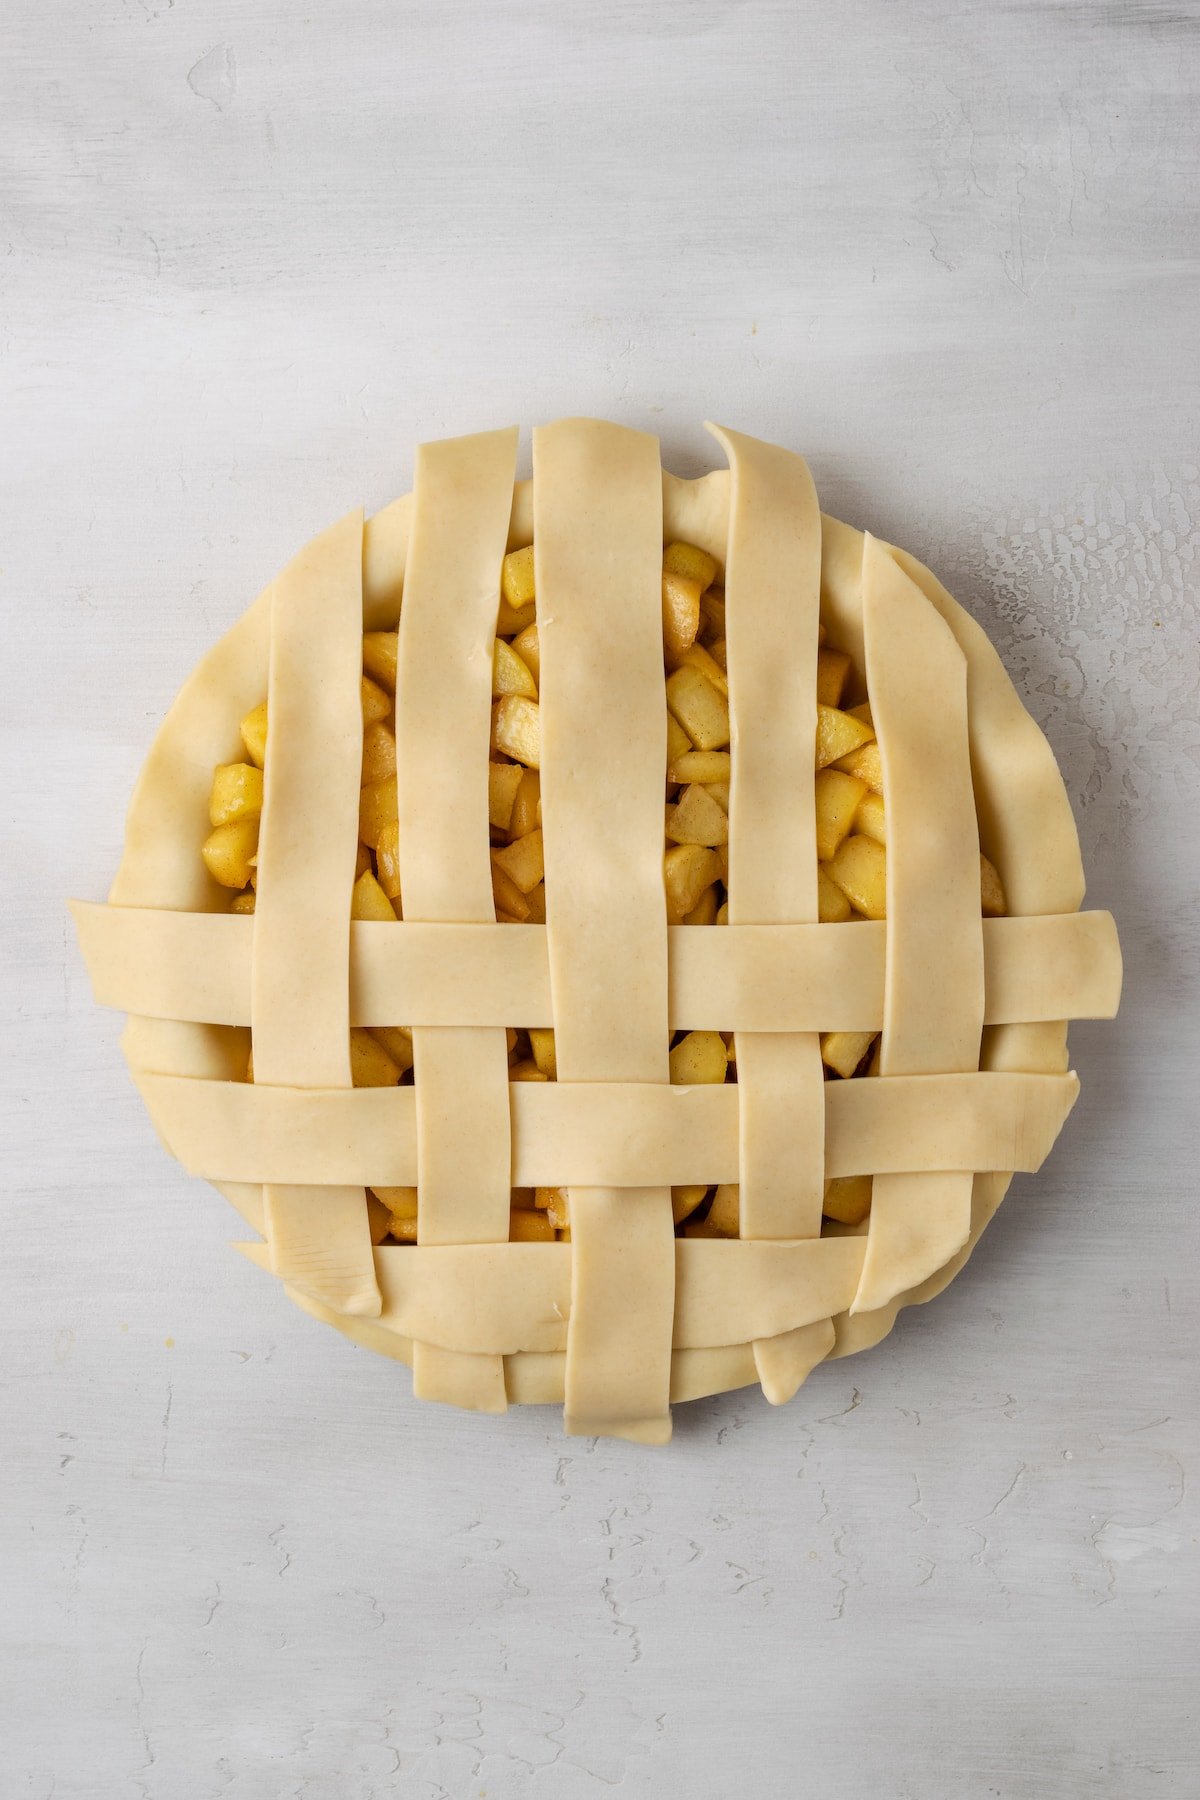 An apple pie with a partially completed lattice top.